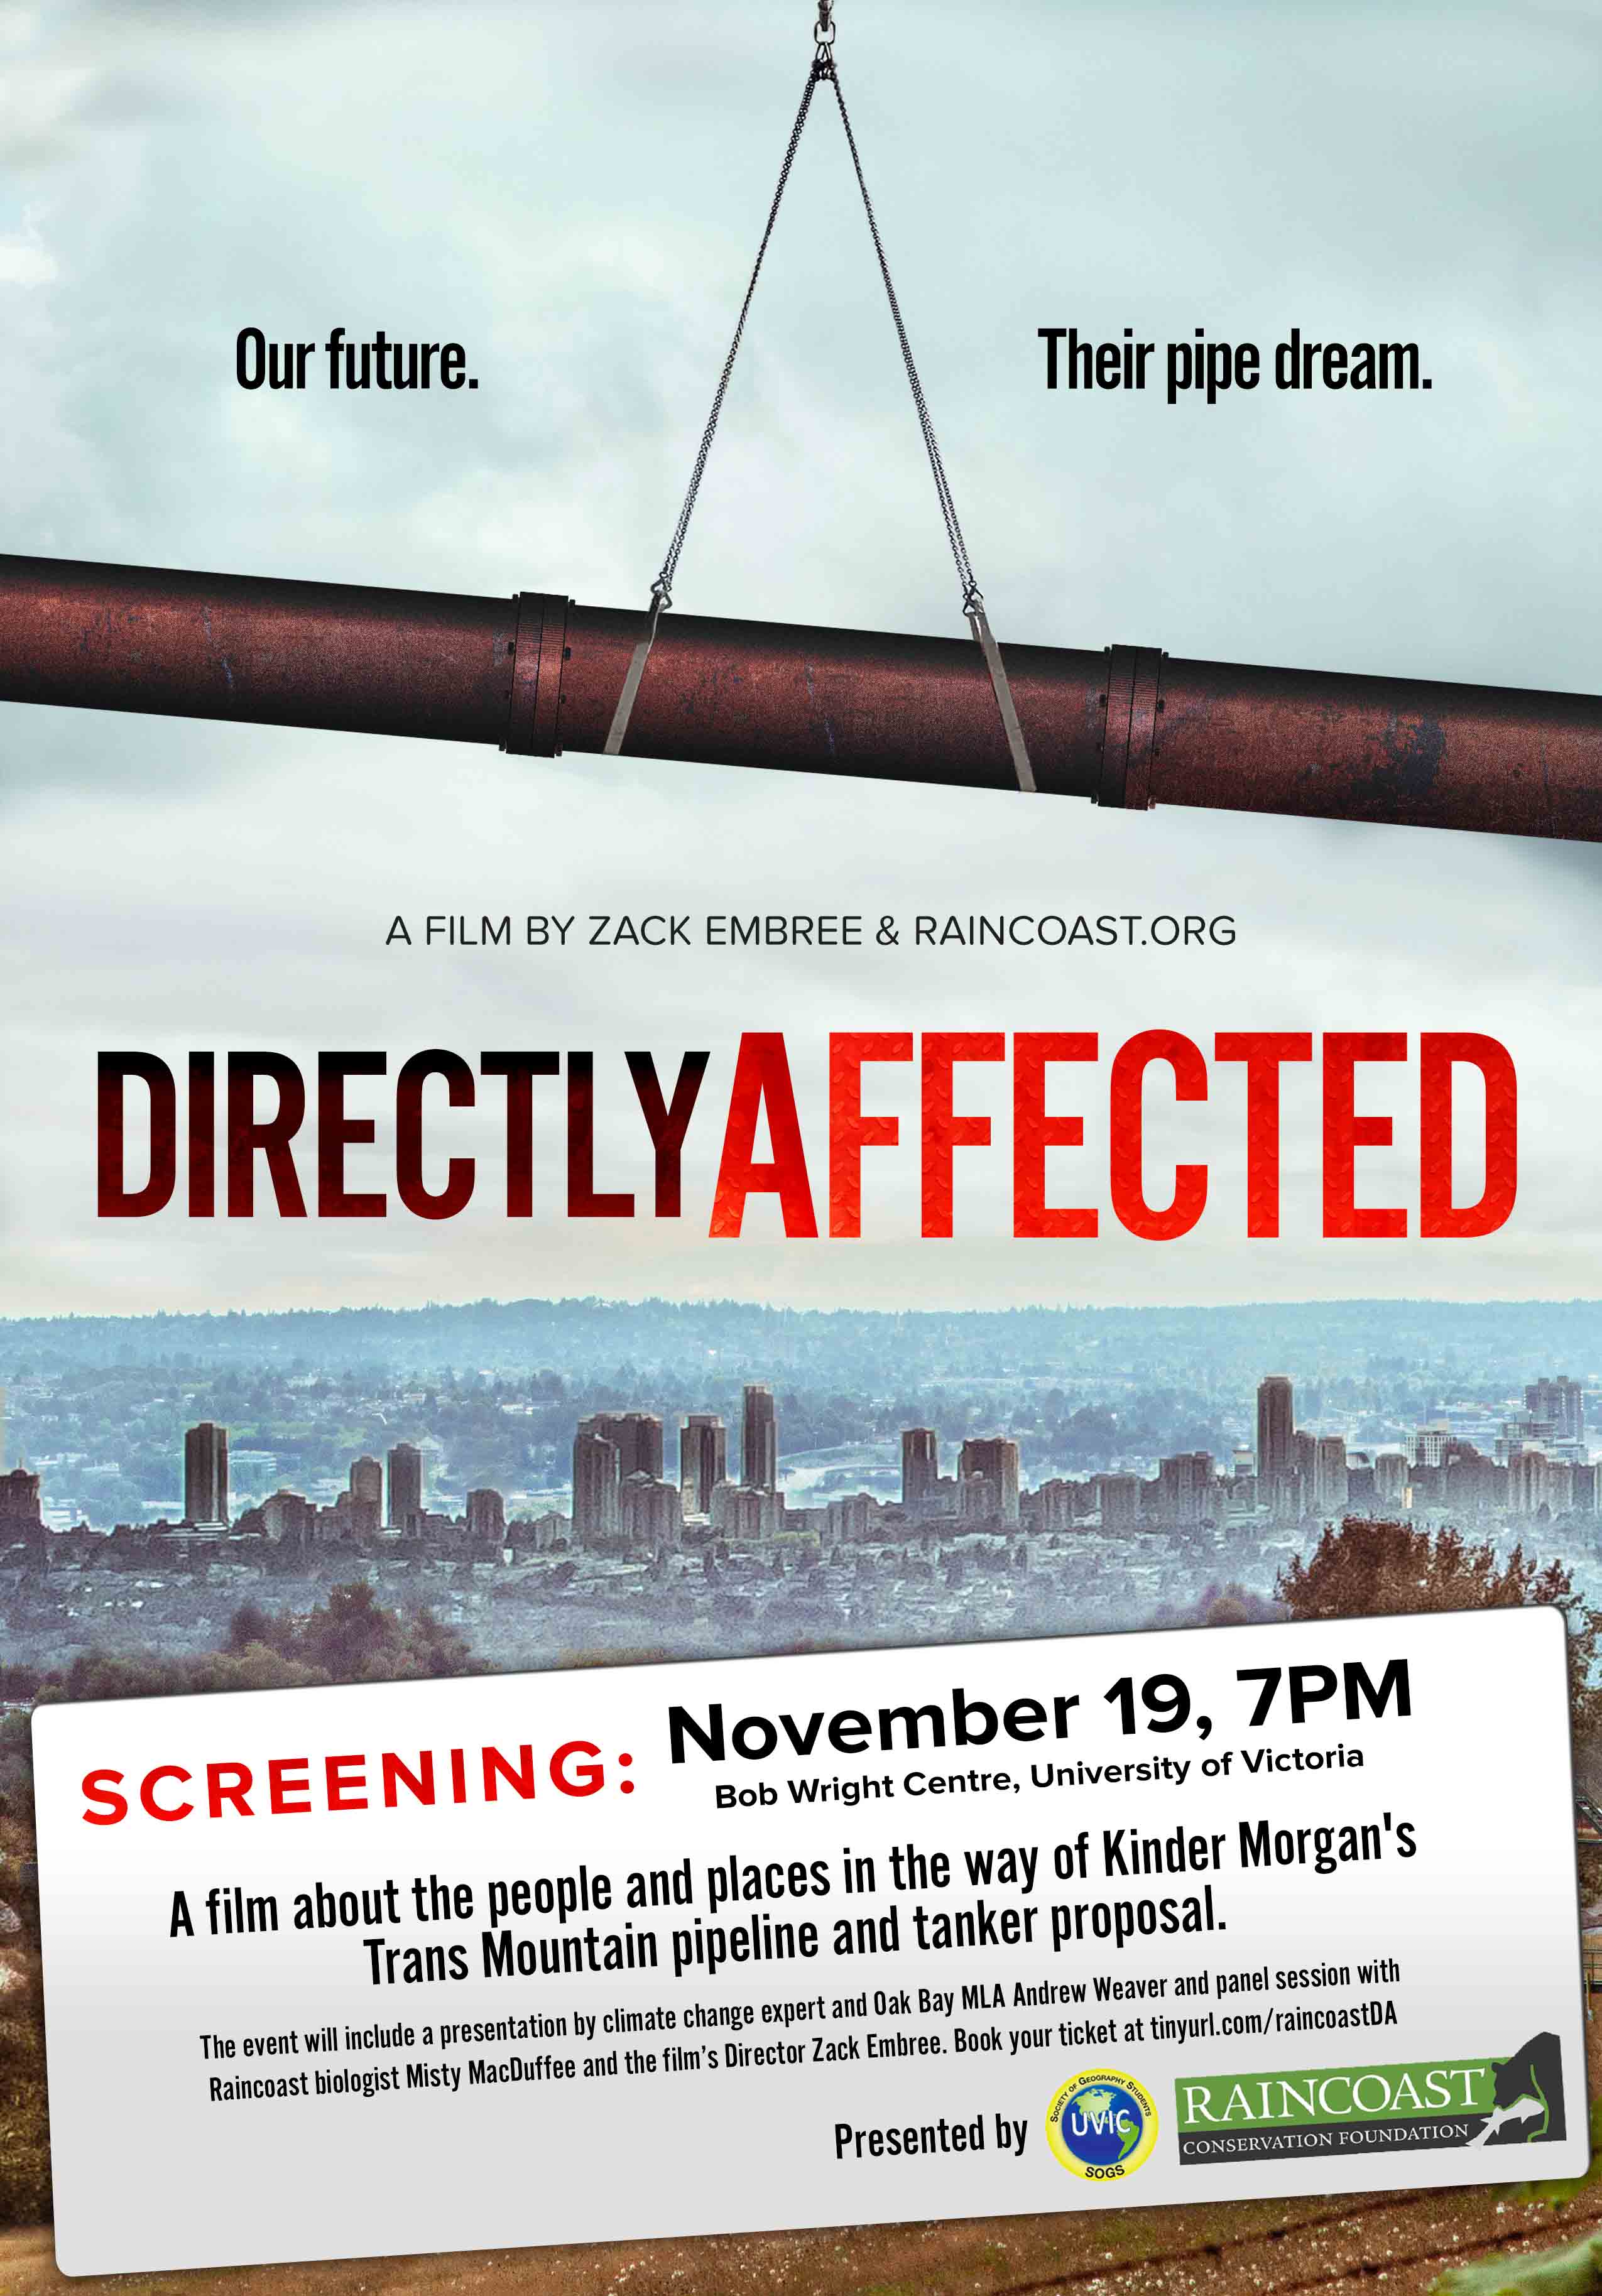 Tonight: Victoria premiere of Directly Affected